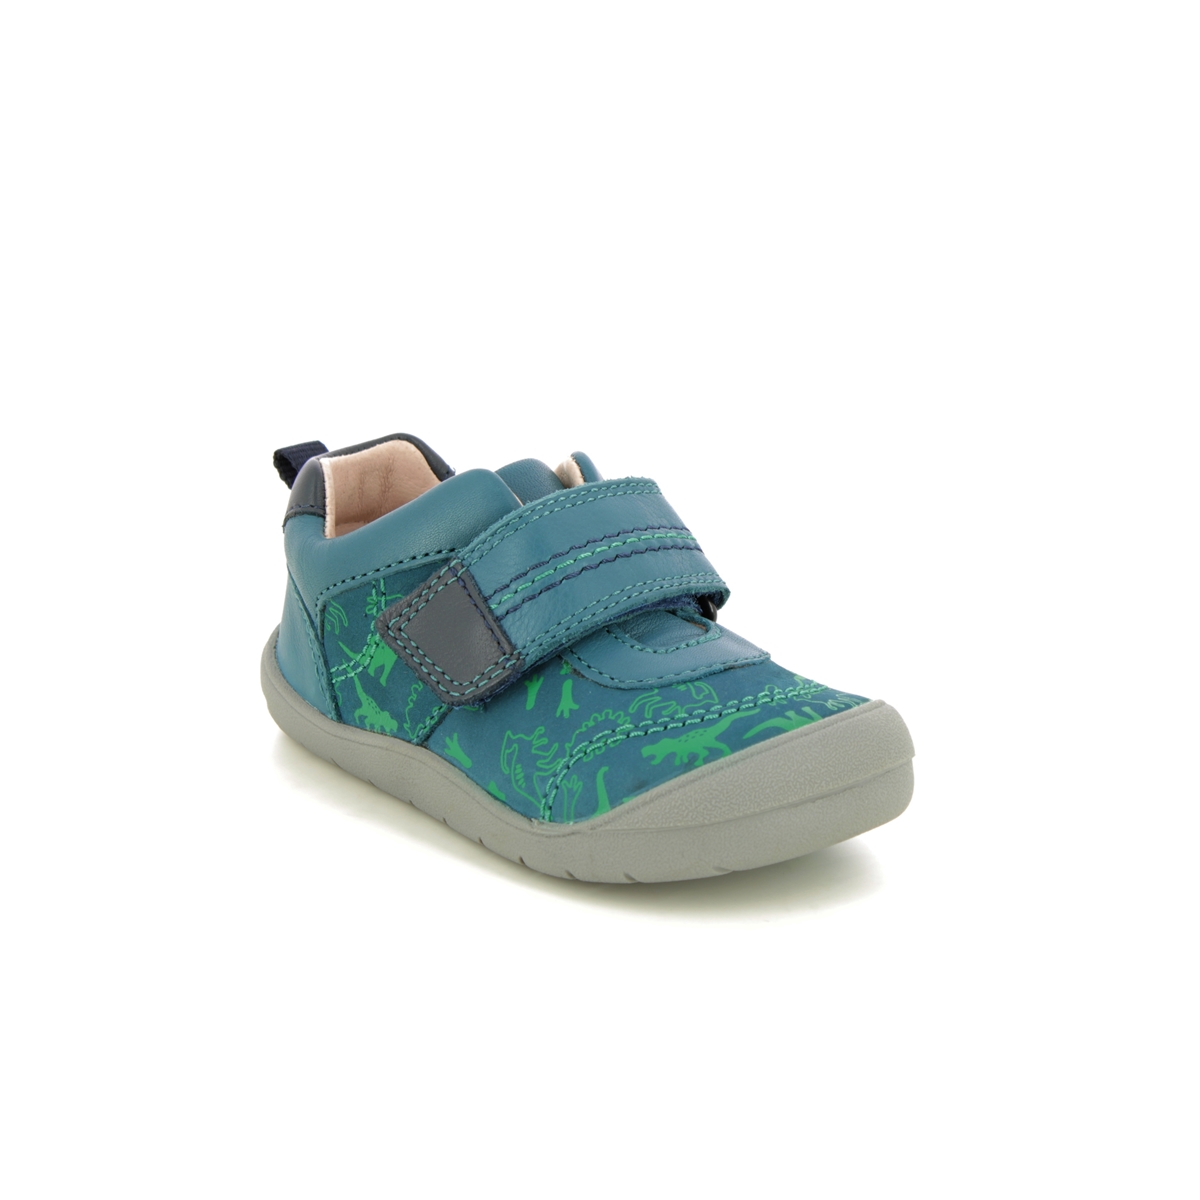 Start Rite - Footprint In Teal Blue 0769-46F In Size 4.5 In Plain Teal Blue Boys First And Toddler Shoes  In Teal Blue For kids